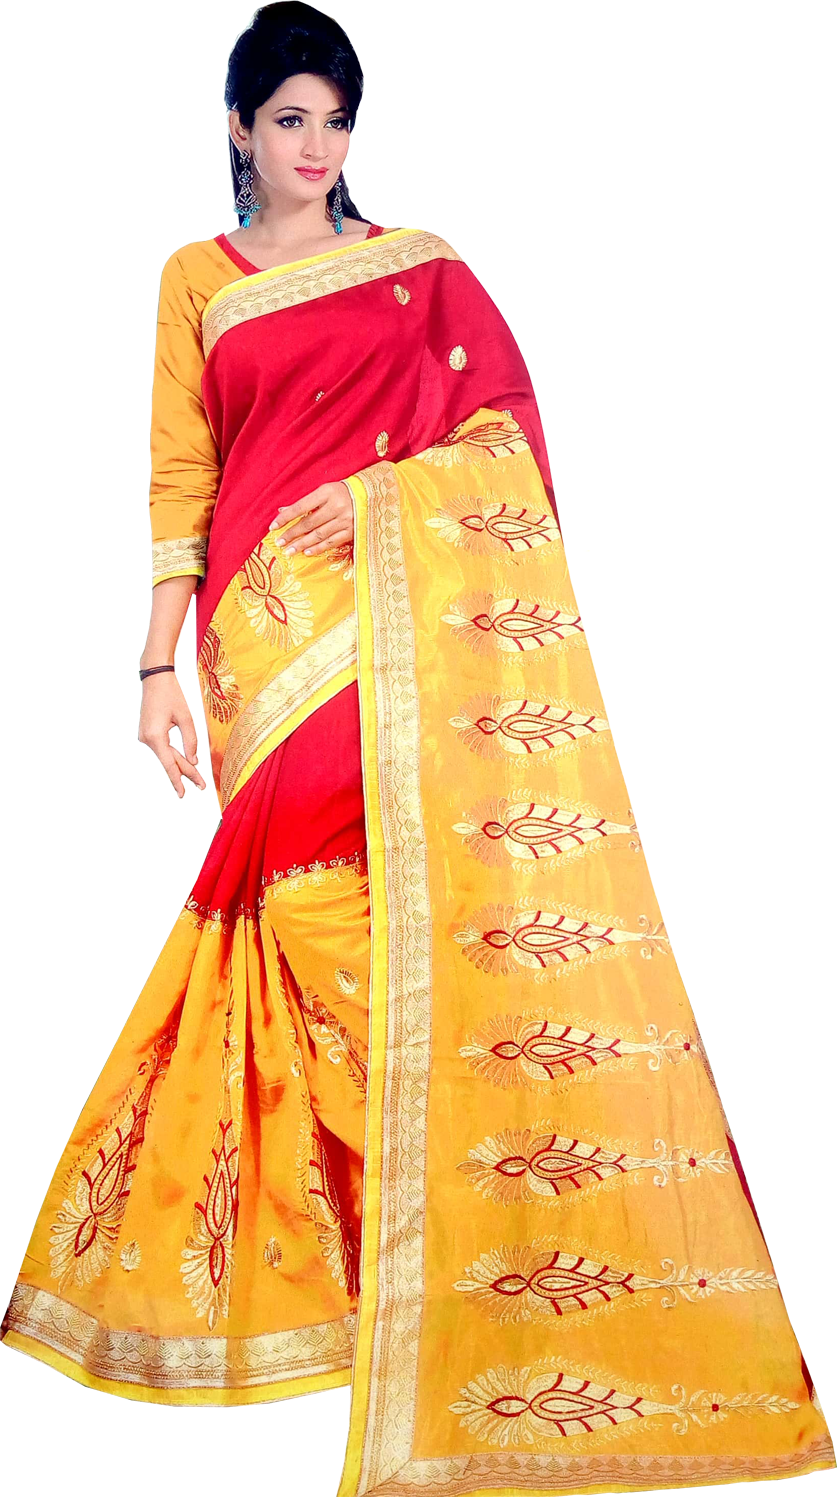 Embroidered Synthetic fancysare Limited offer Ã¢â€šÂ¹800   20% Off @Vmaxo